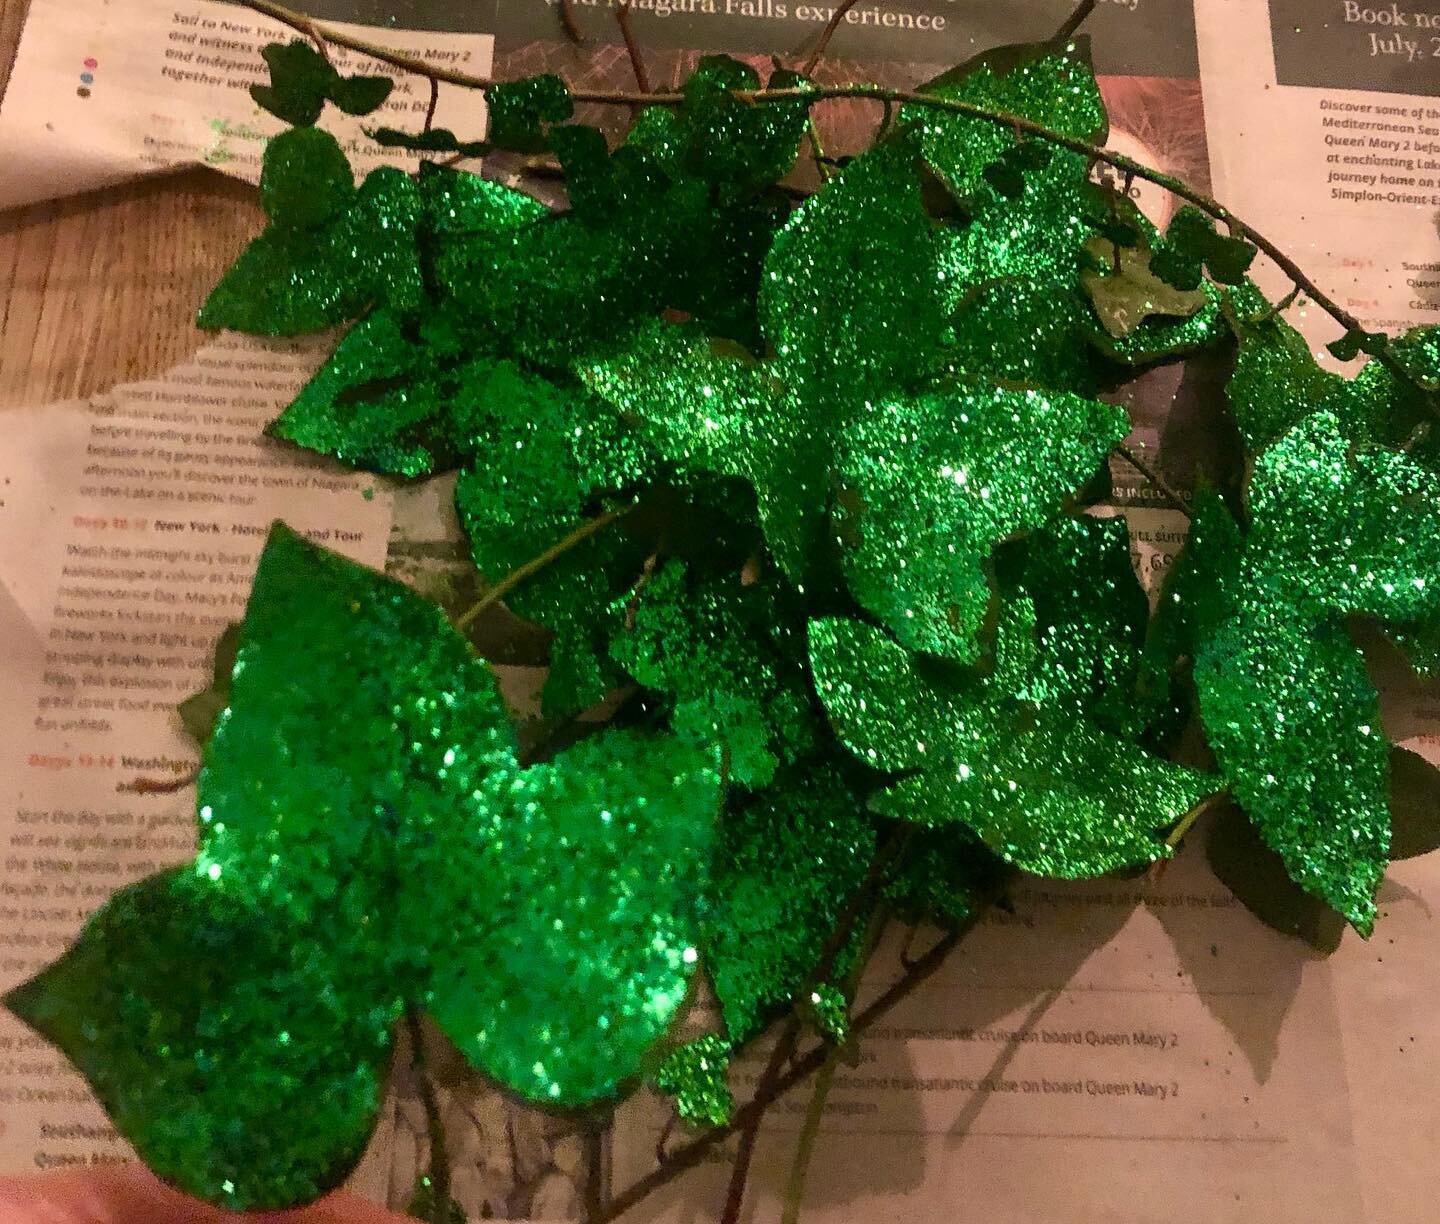 When you wish the ivy leaves you&rsquo;ve just covered in glue and glitter were real jewels 💚🙄#windowdisplay #diy #glitter #homemade #christmas @georgina.skan